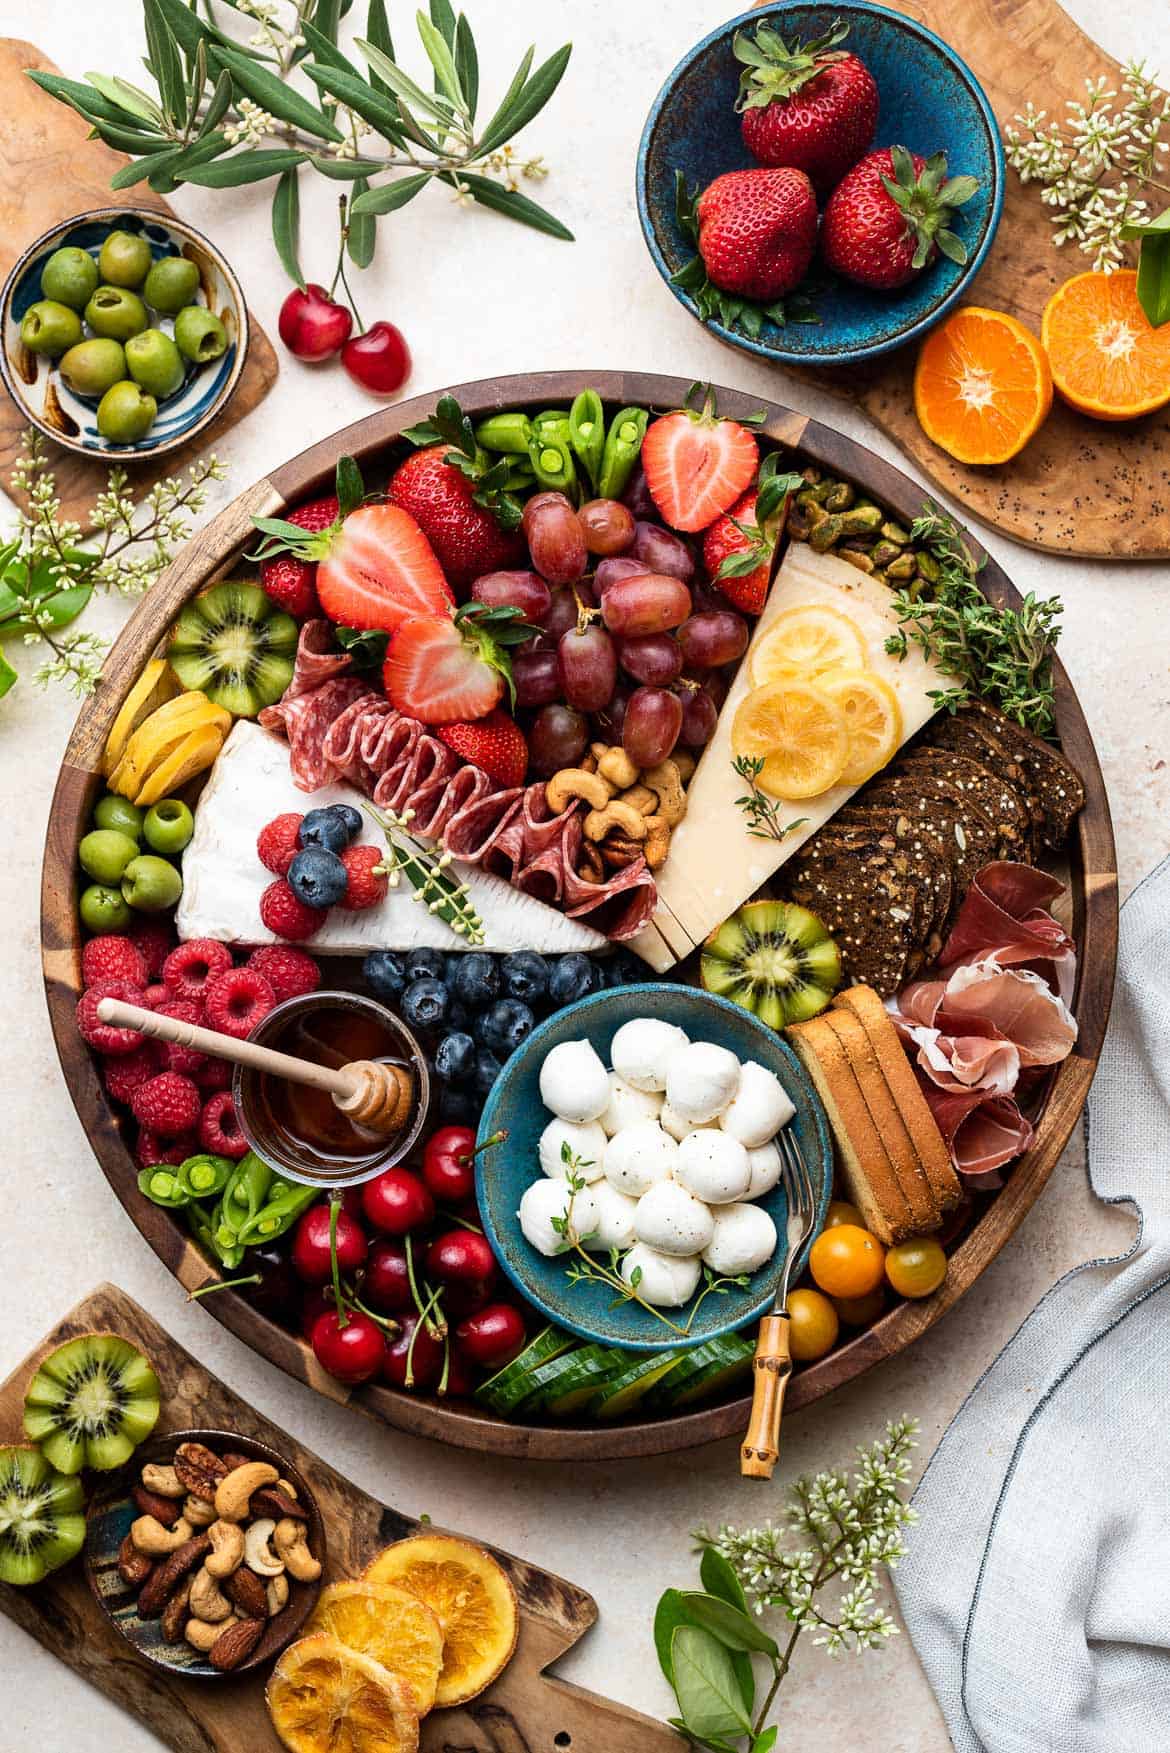 How to Make a Charcuterie Board - What Is a Charcuterie Board?